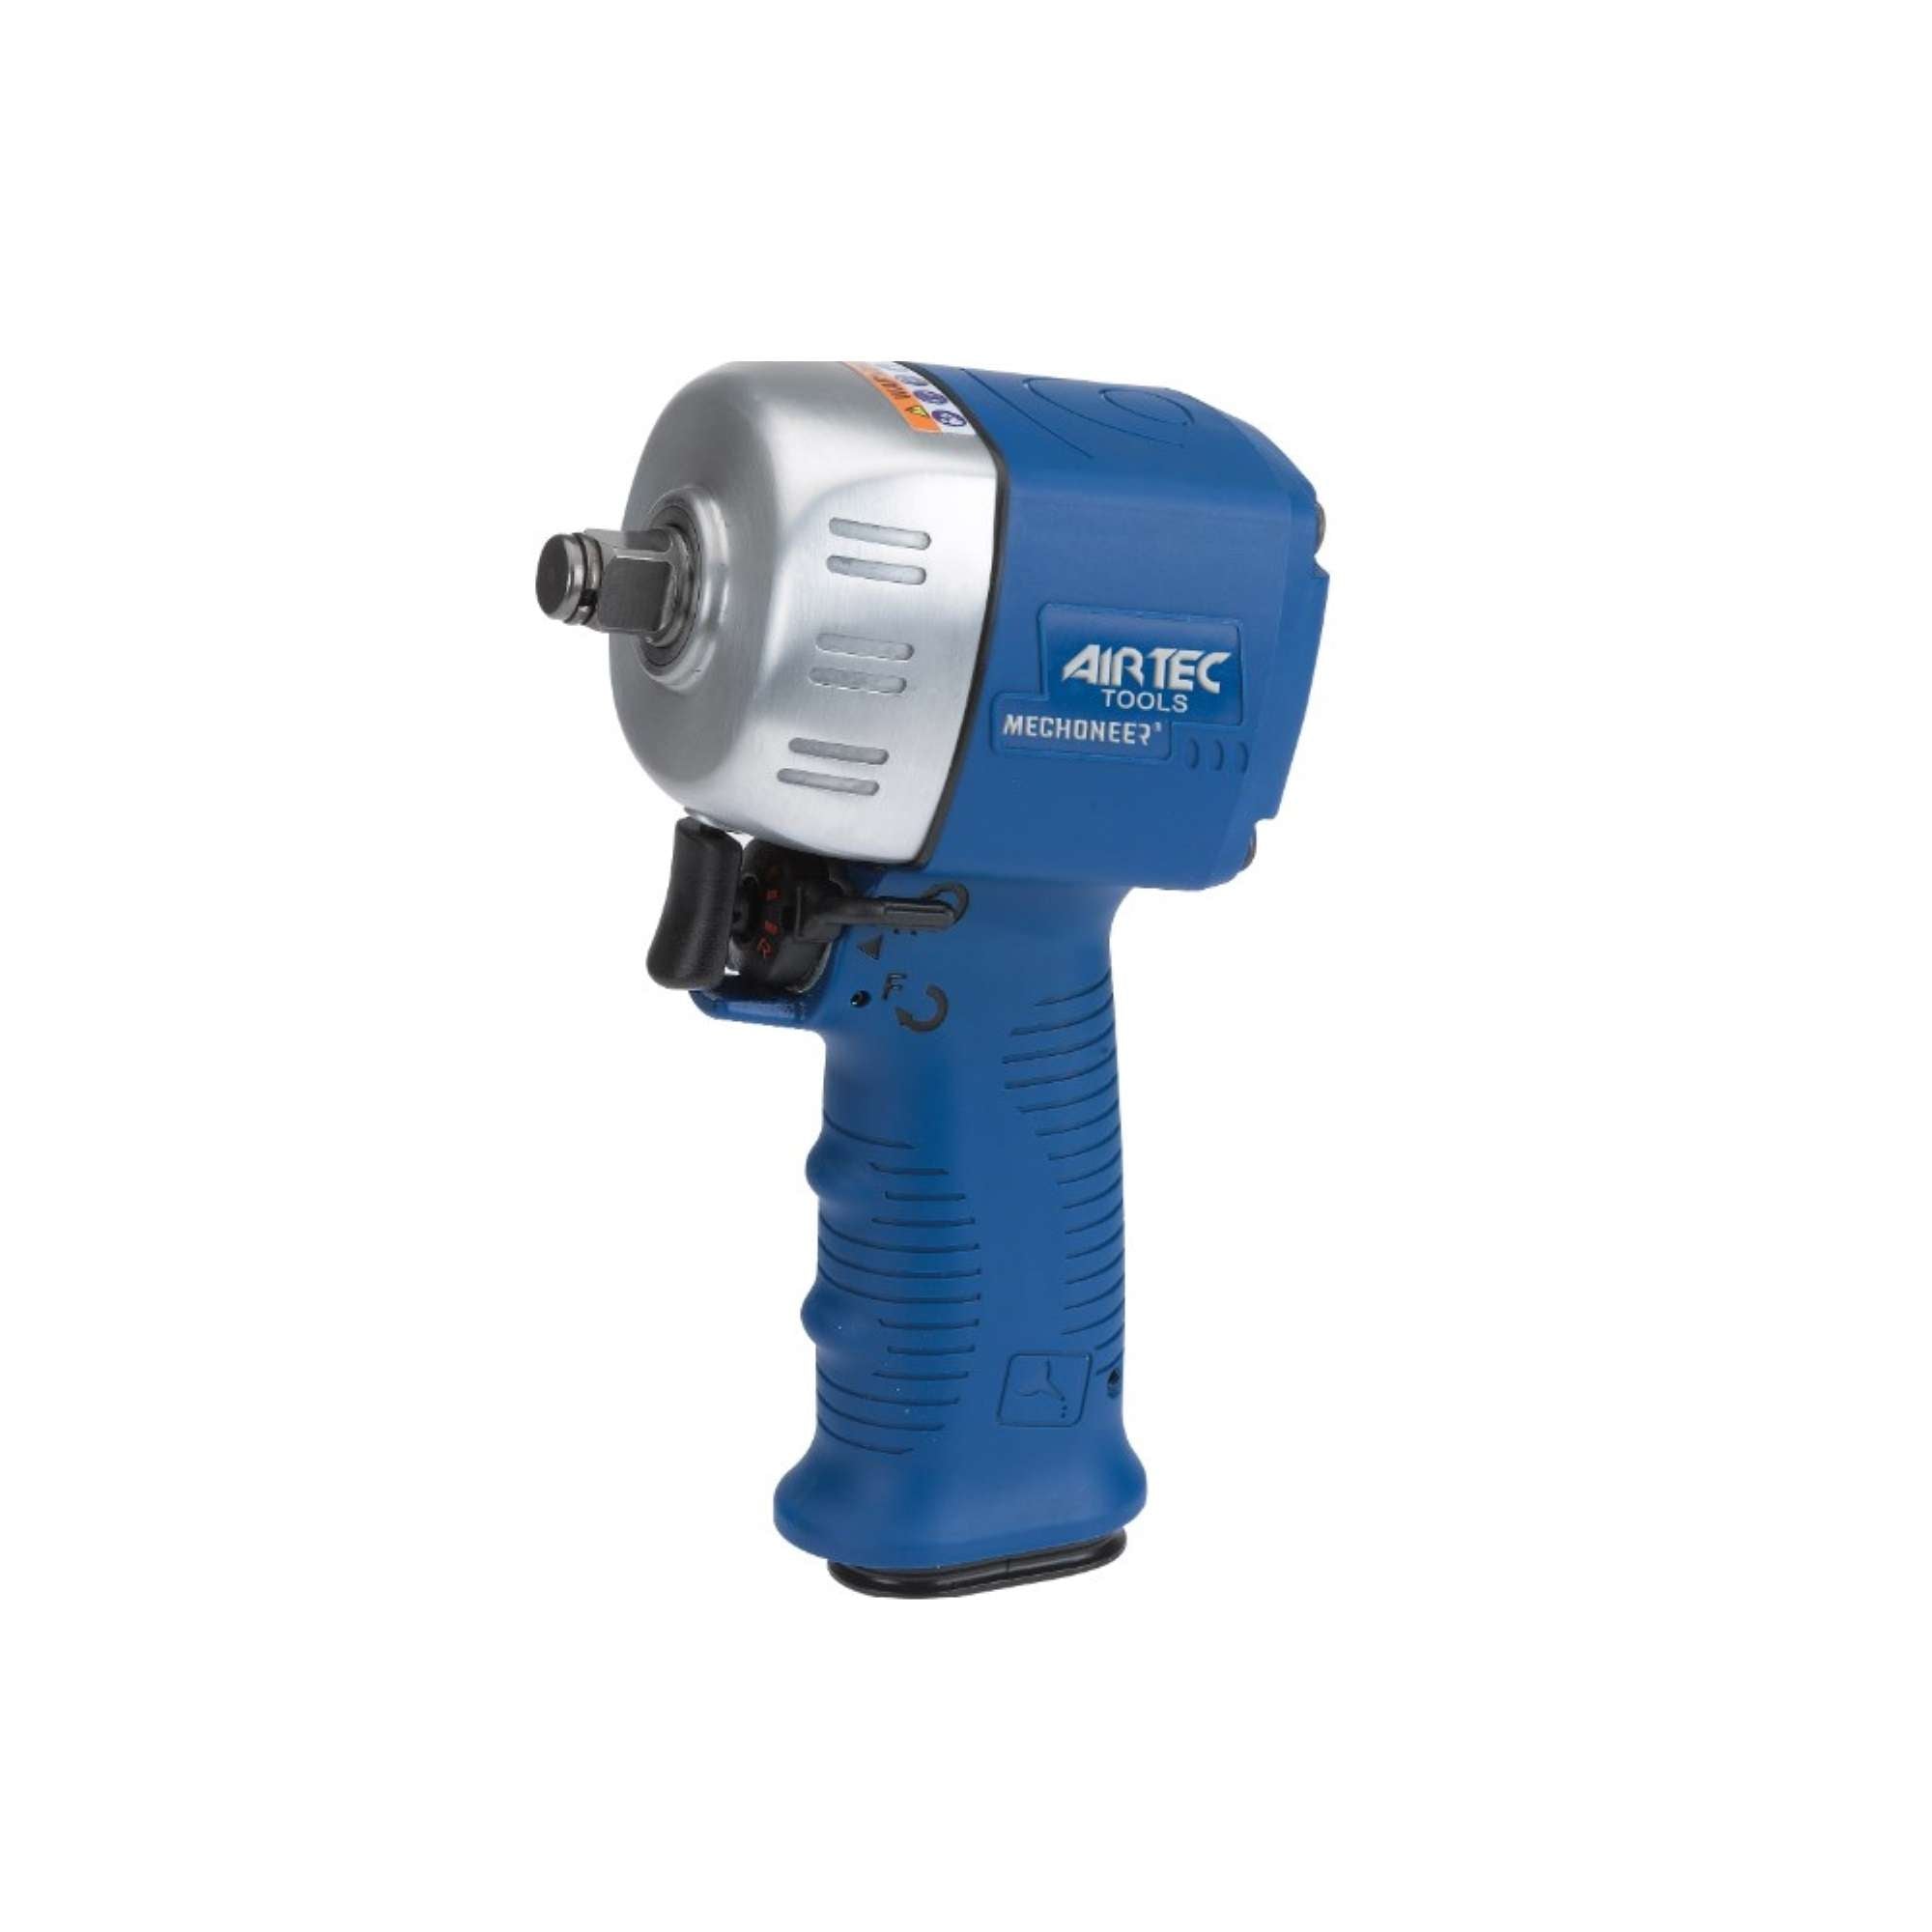 1/2" mini impact wrench with Mechoneer system - AirTec352